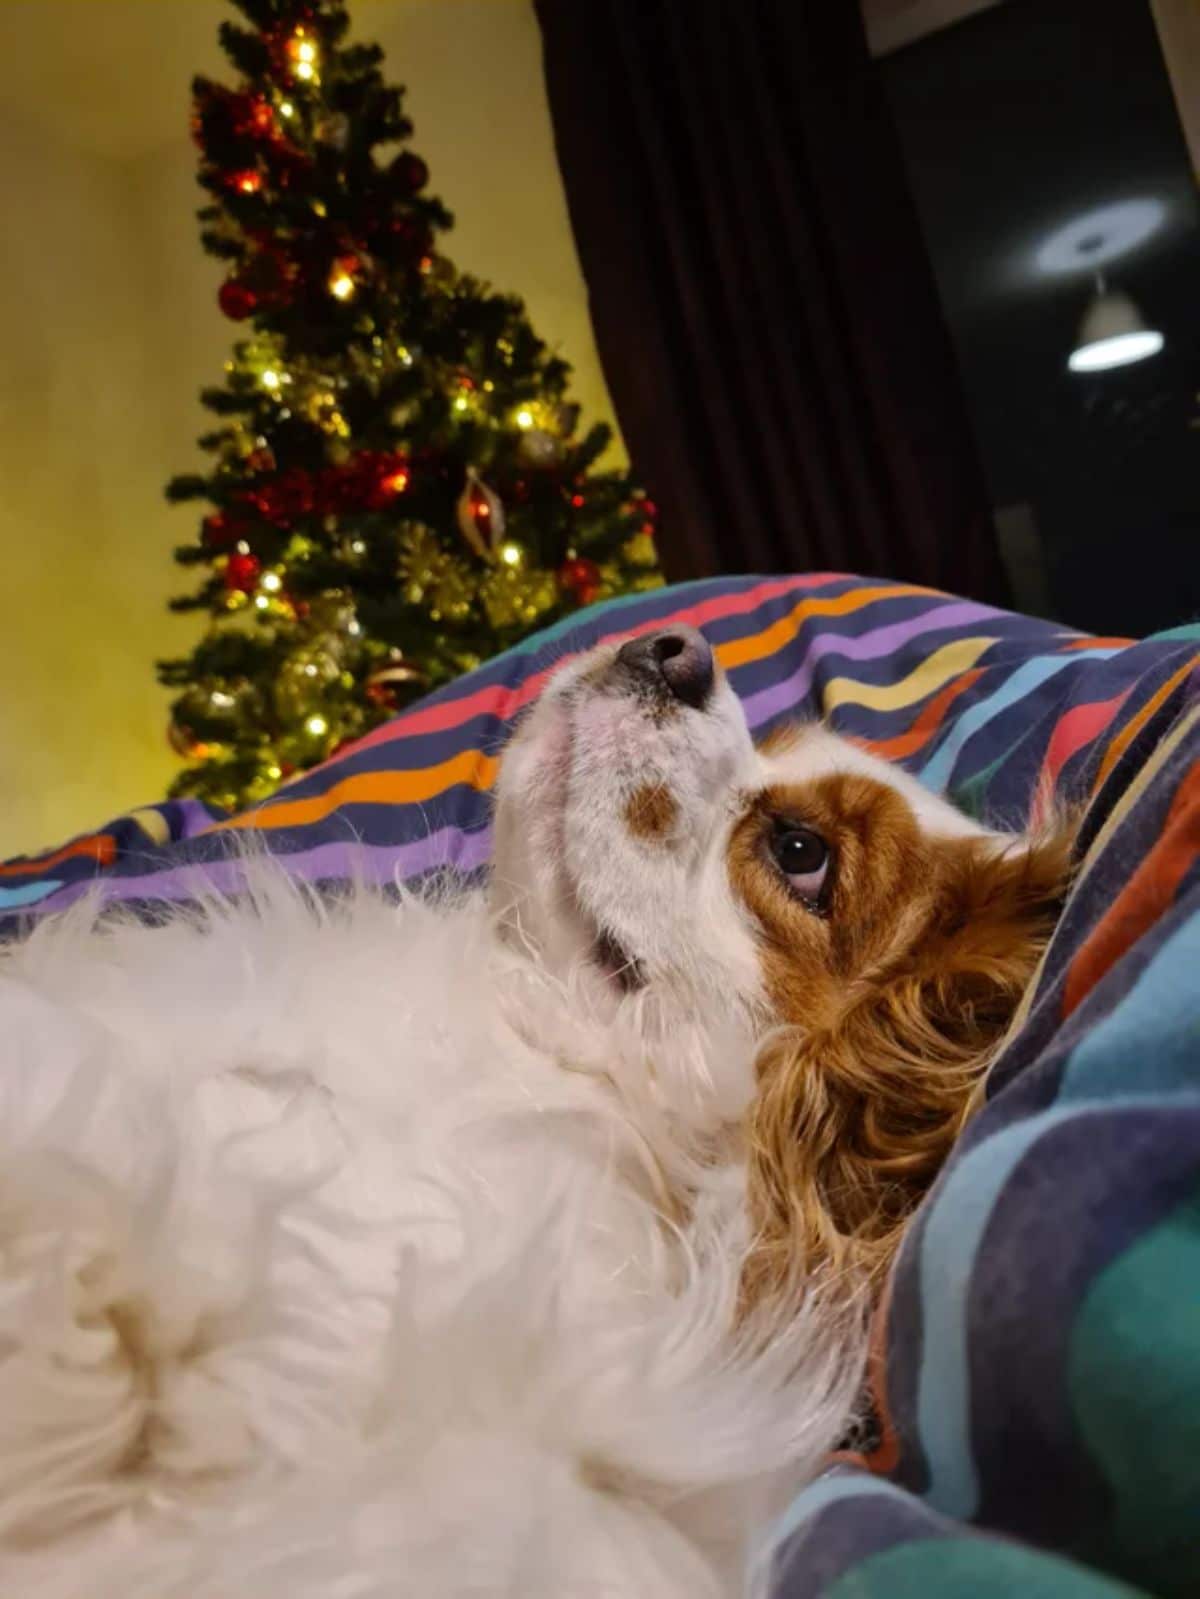 fluffy brown and white dog looking thoughtful laying belly up on colourful blanket with christmas tree in the background